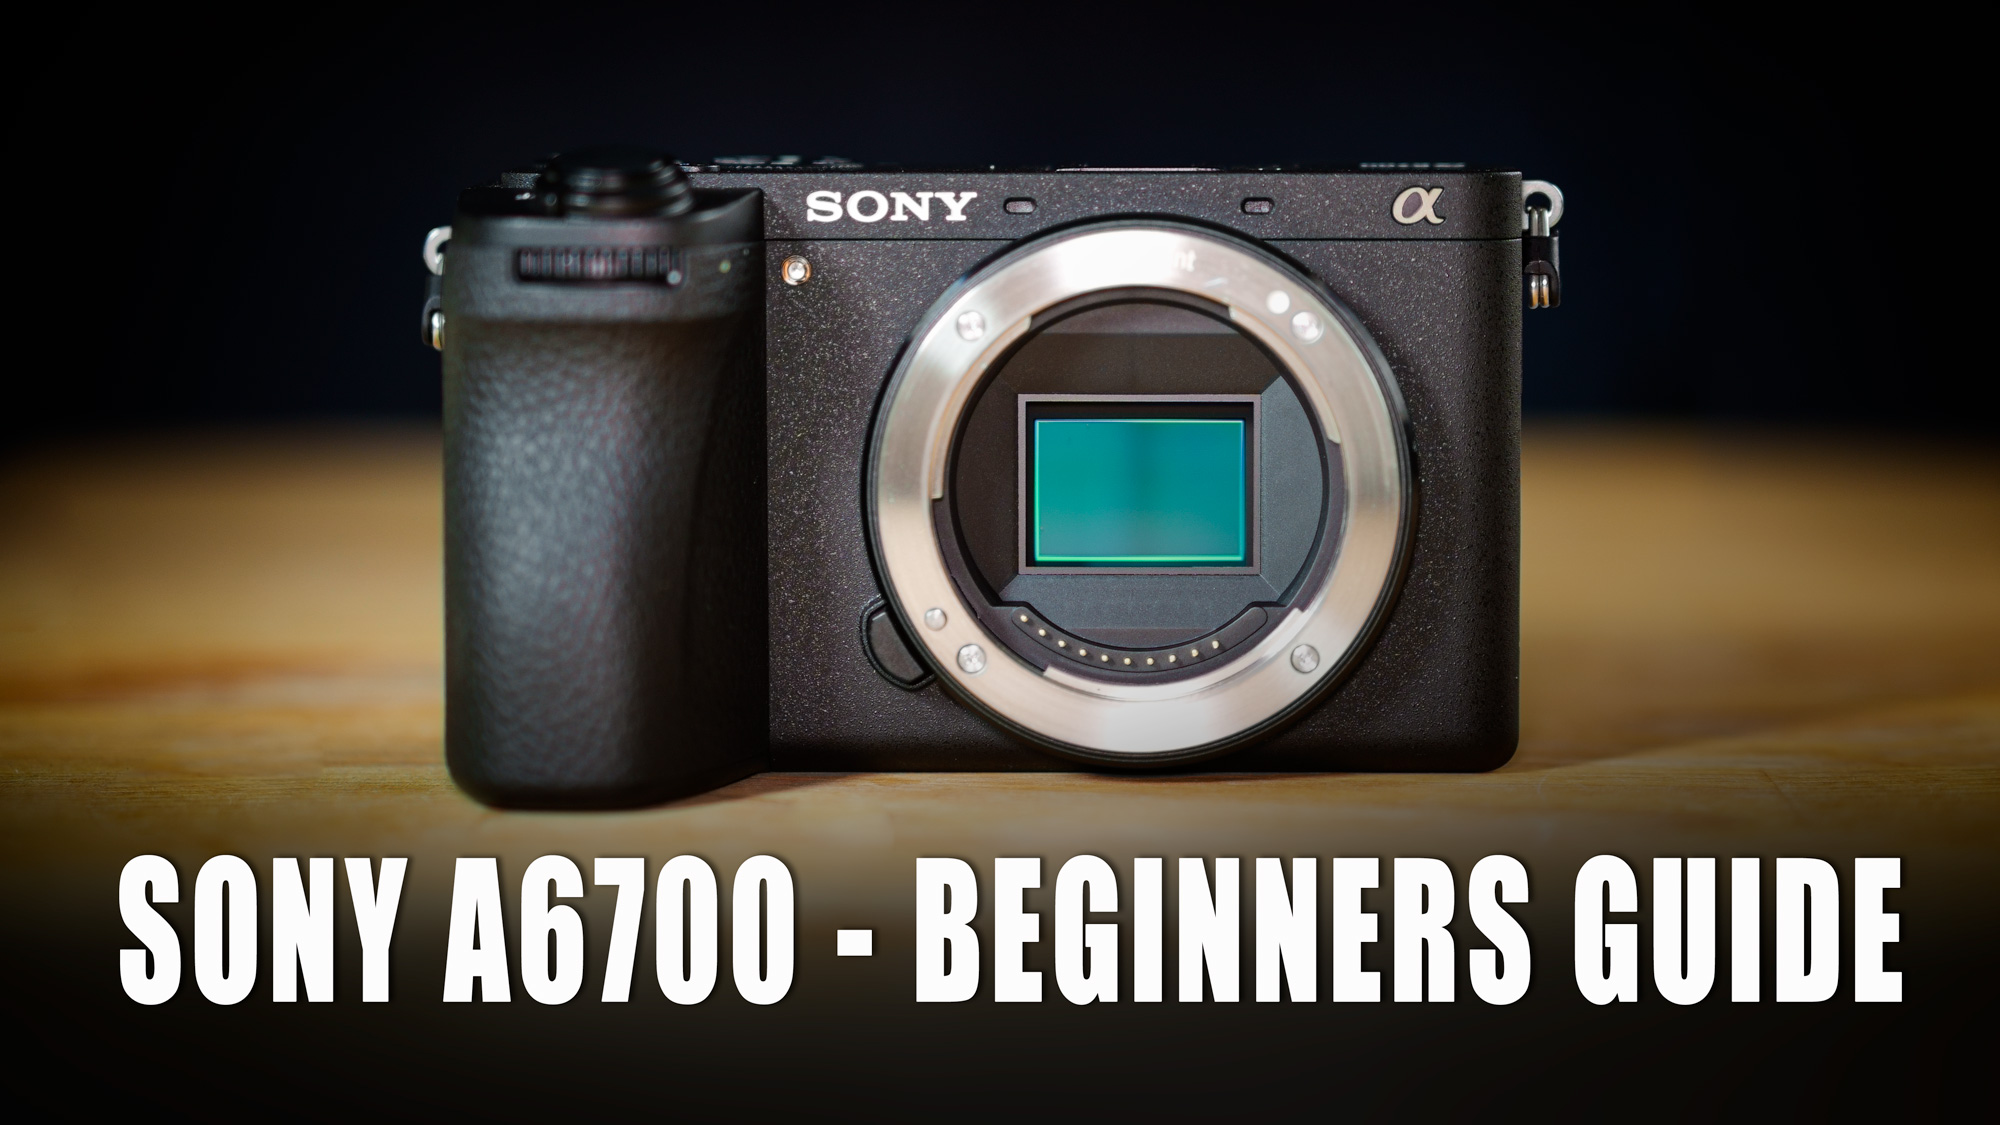 Sony A6700 Beginners Guide